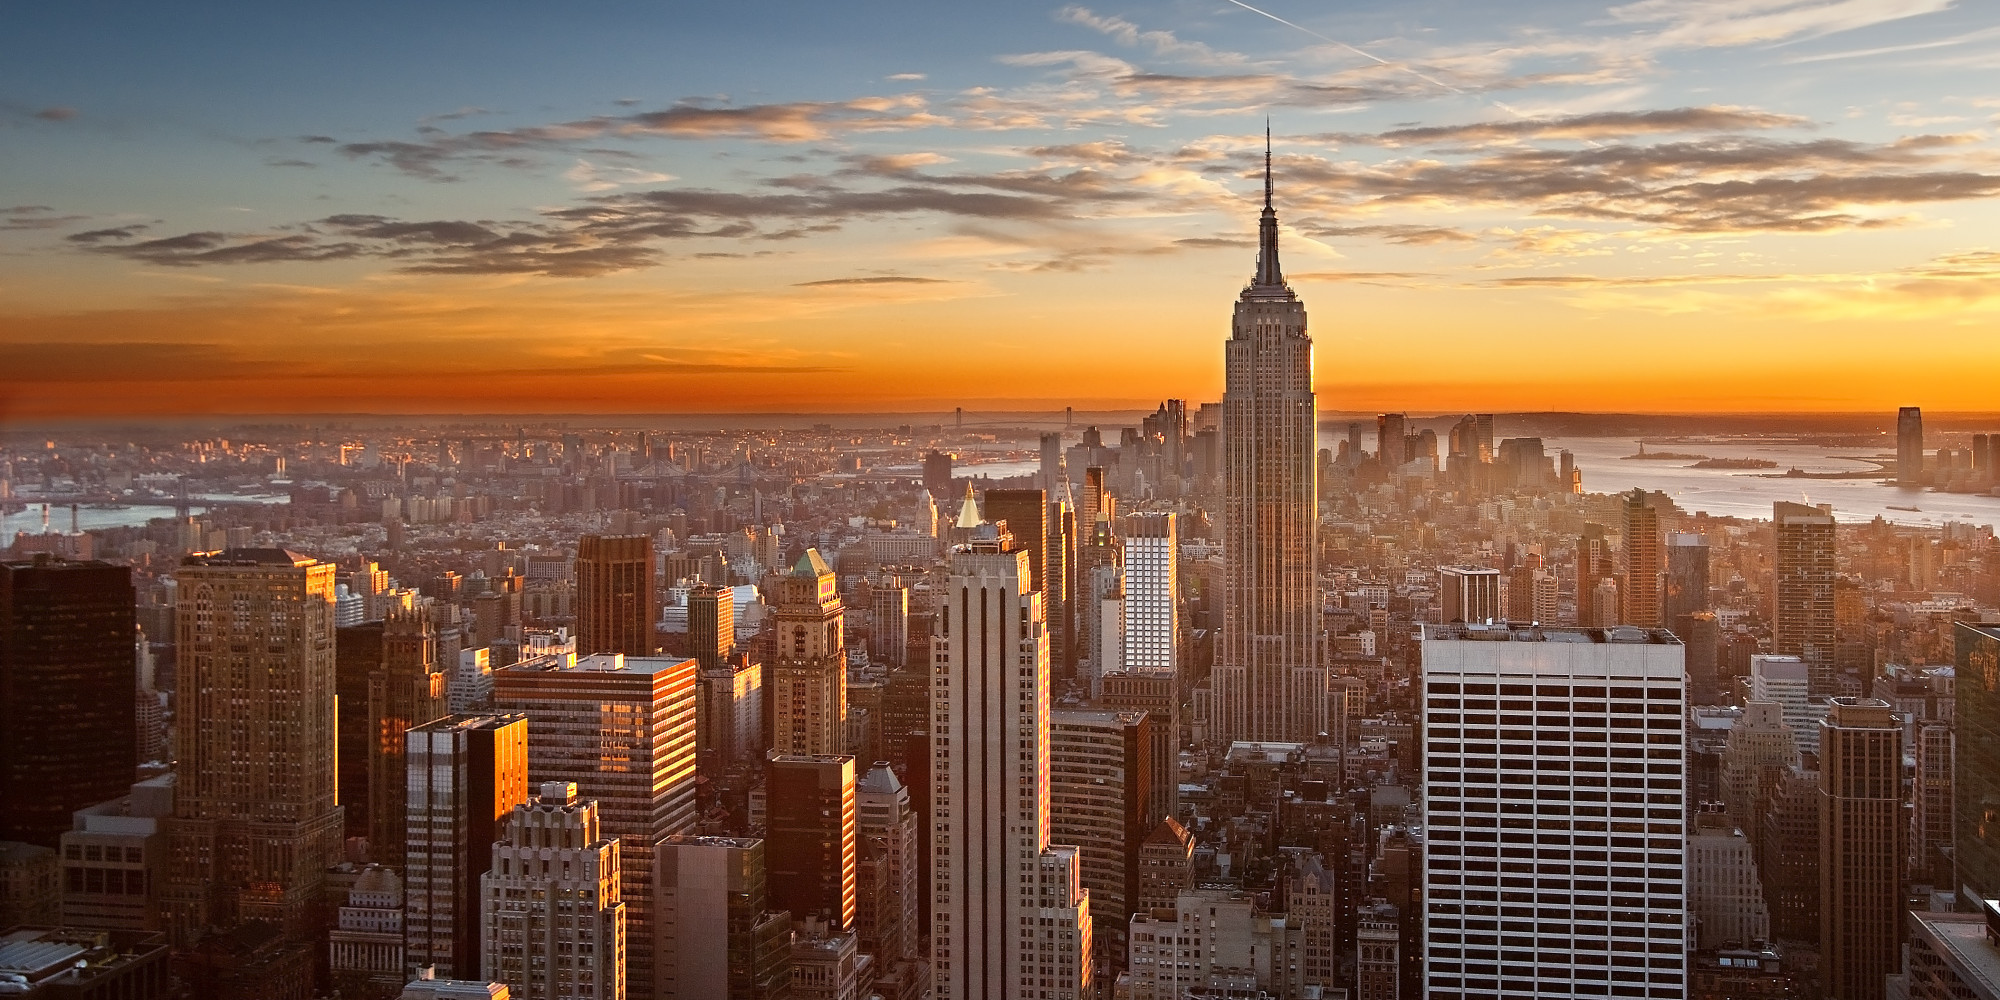 New York Background Images Wallpaper And Free Download